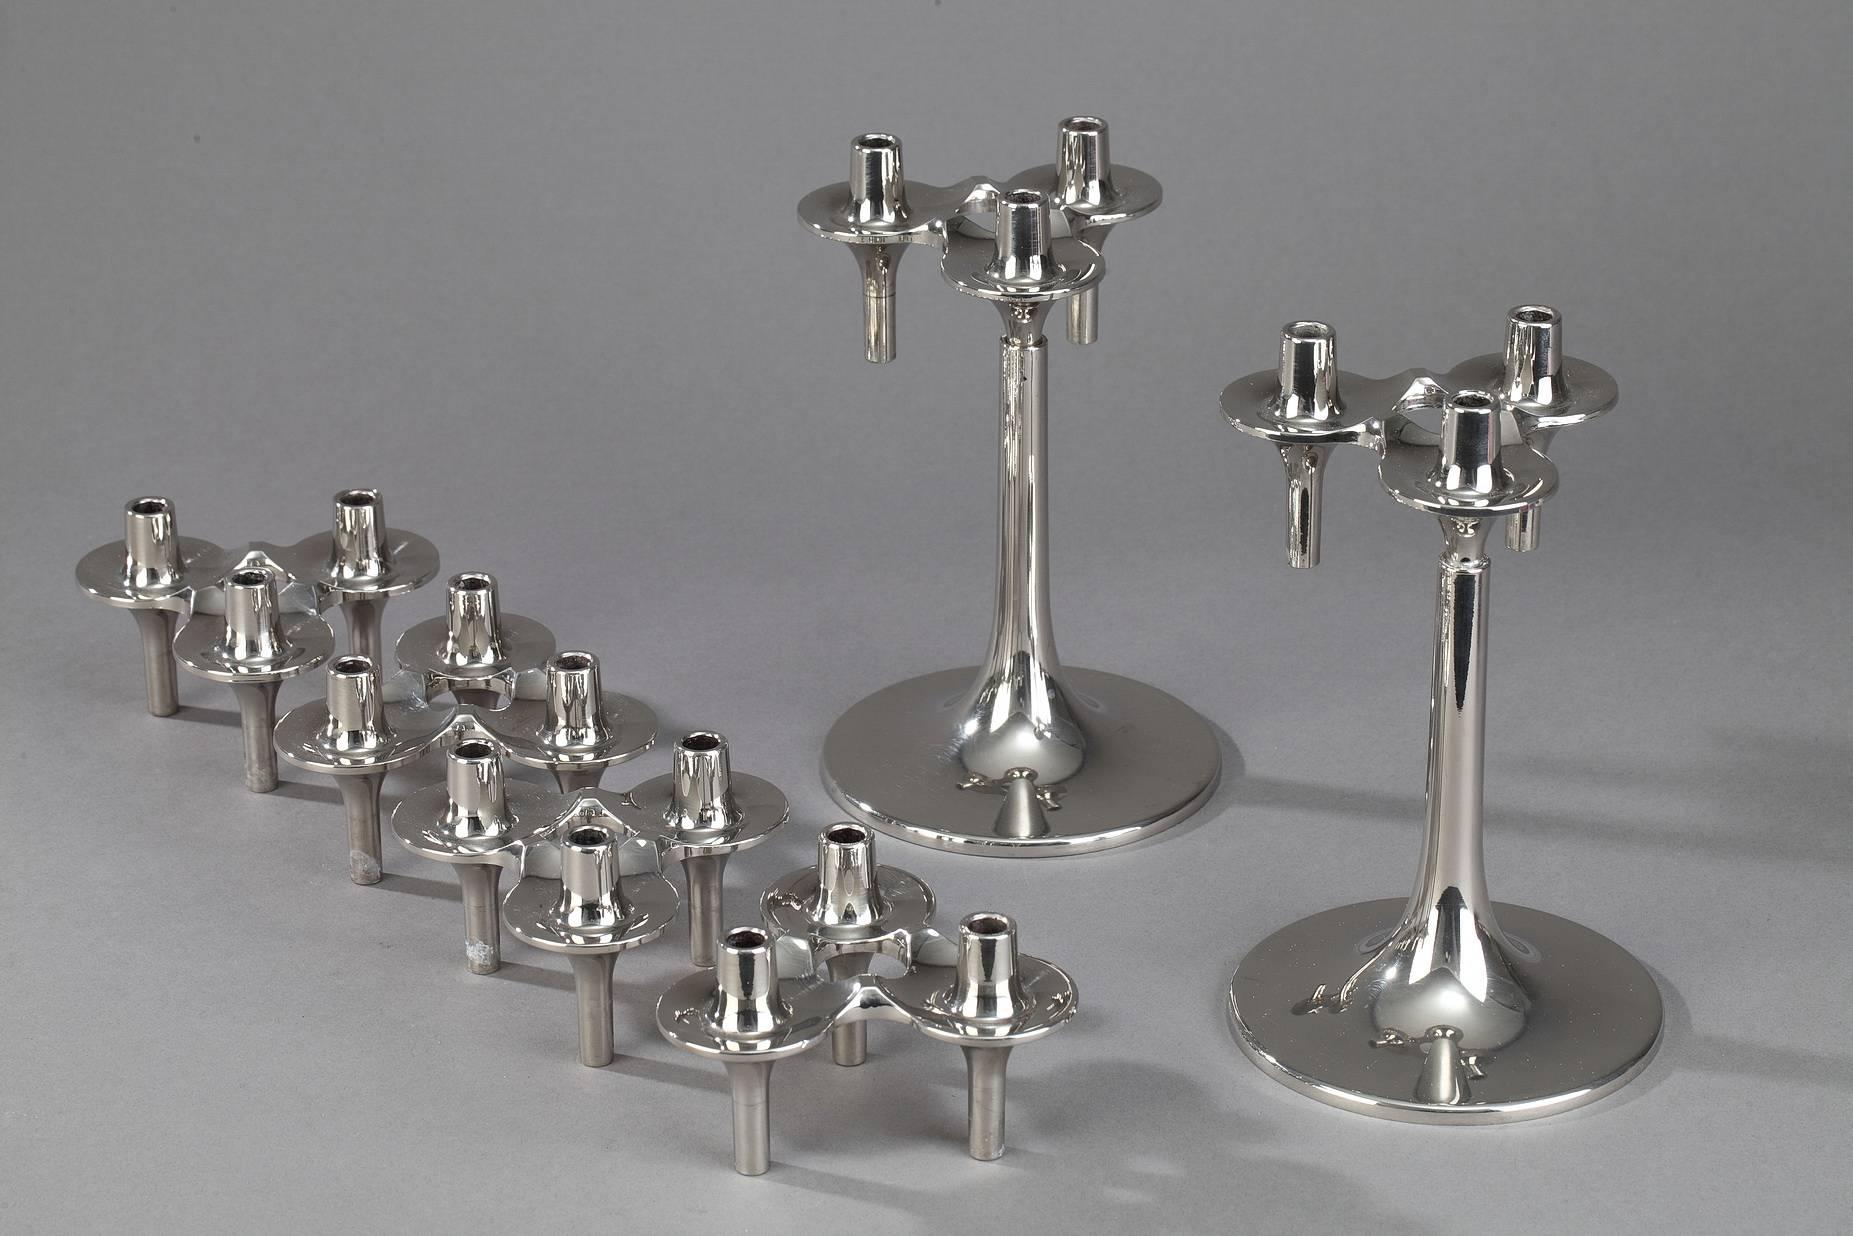 1970s pair of Orion chrome-plated metal candelabra, each of them composed of 3 modular candlesticks and 1 stem with circular base. Produced by Bayerische Metallwarenfabrik (BMF) in Germany. As Nagel candle holders, BMF candlesticks can be used